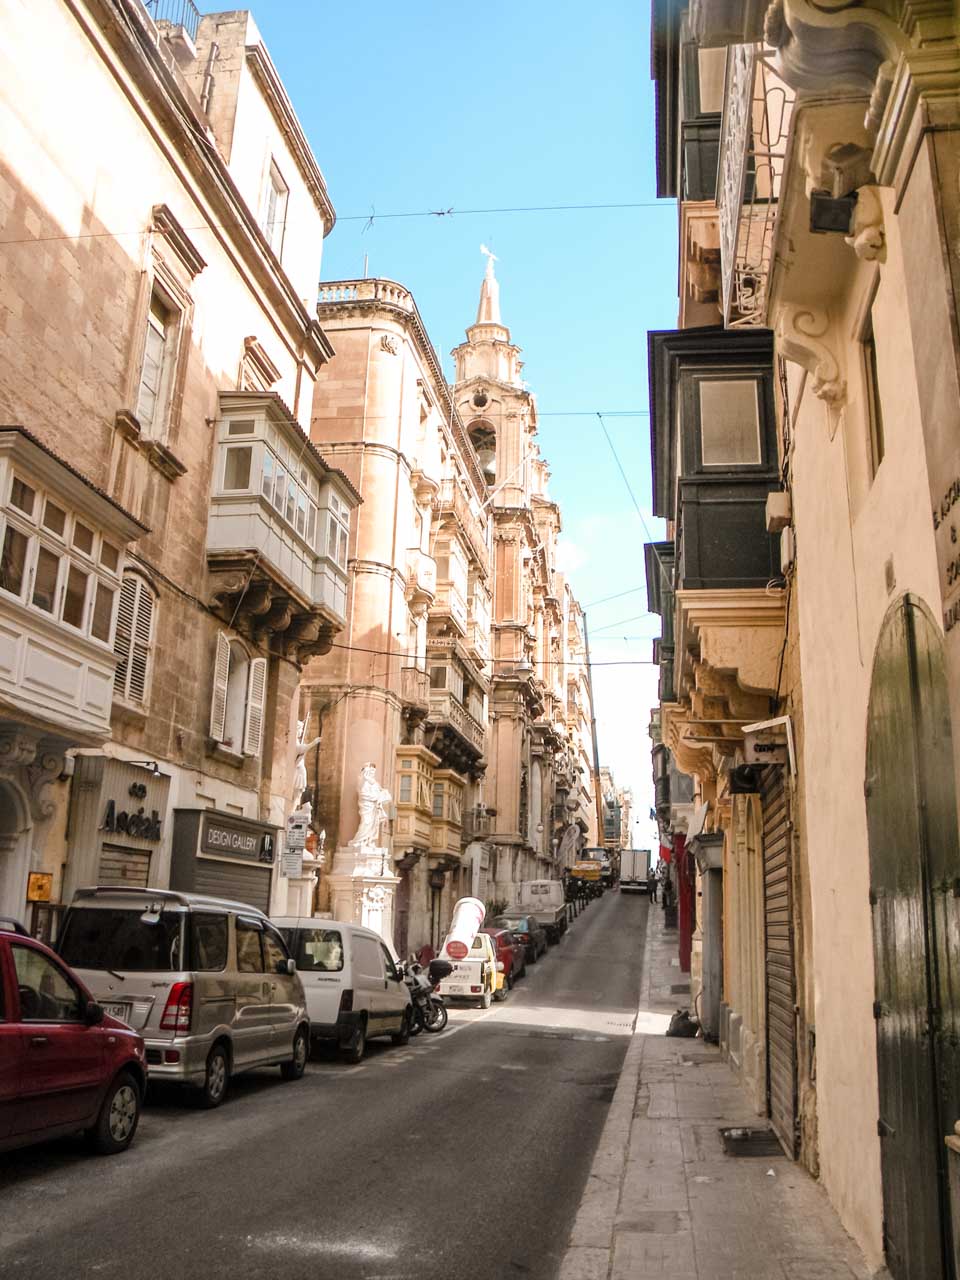 A street in Valletta, Malta lined with cars